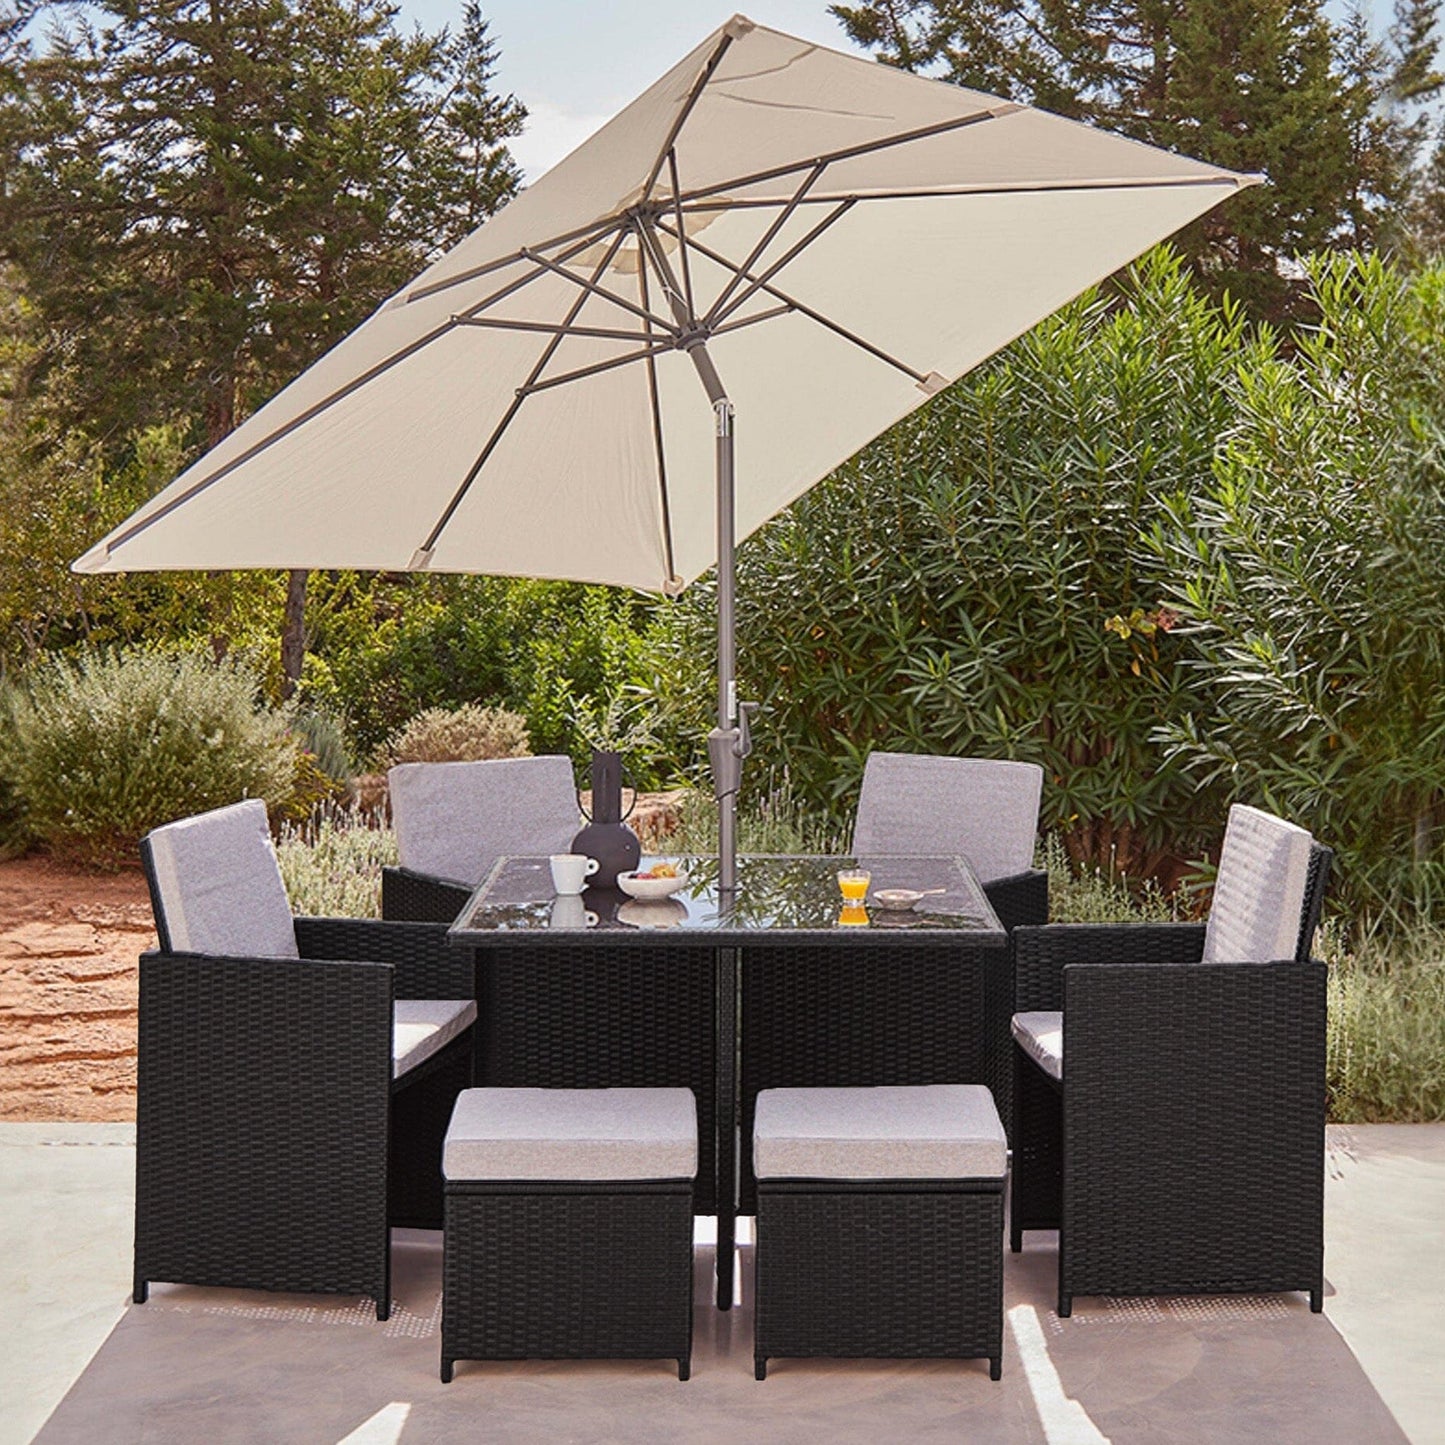 8 Seater Rattan Cube Outdoor Dining Set with Parasol - Black Weave